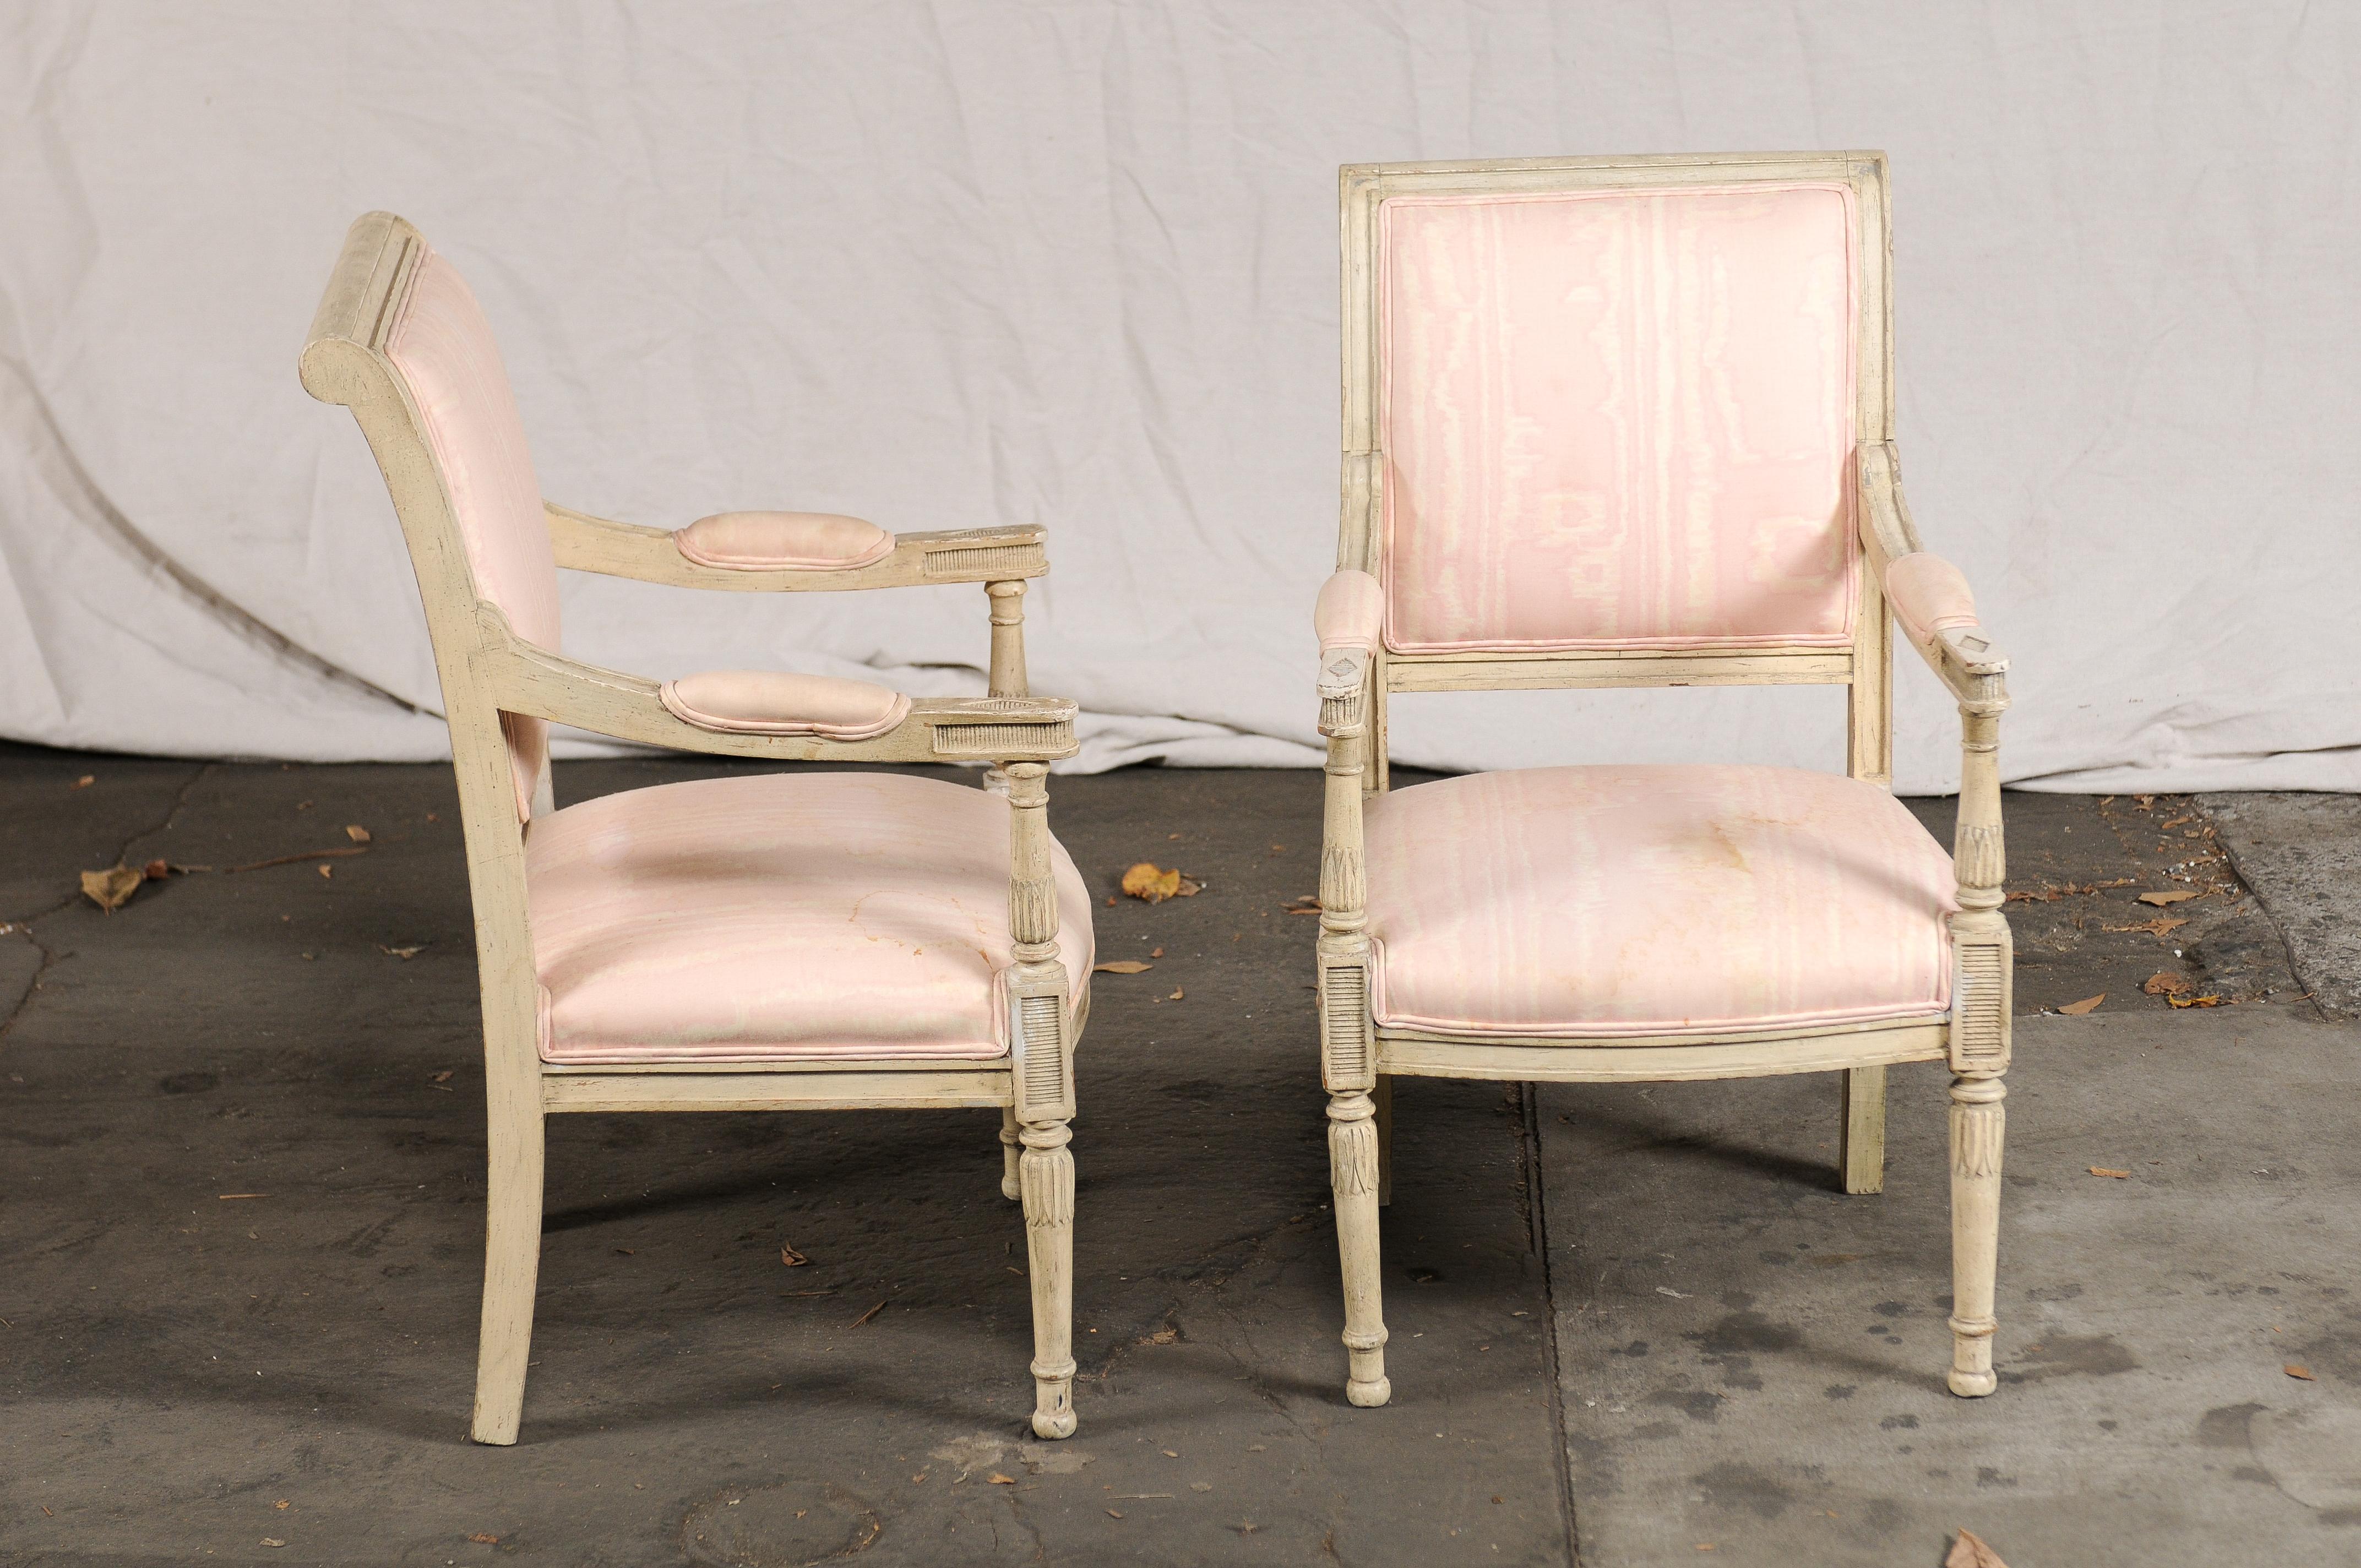 Pair of 19th-Early 20th Century French Child's Chairs, Painted Directoire Style 5